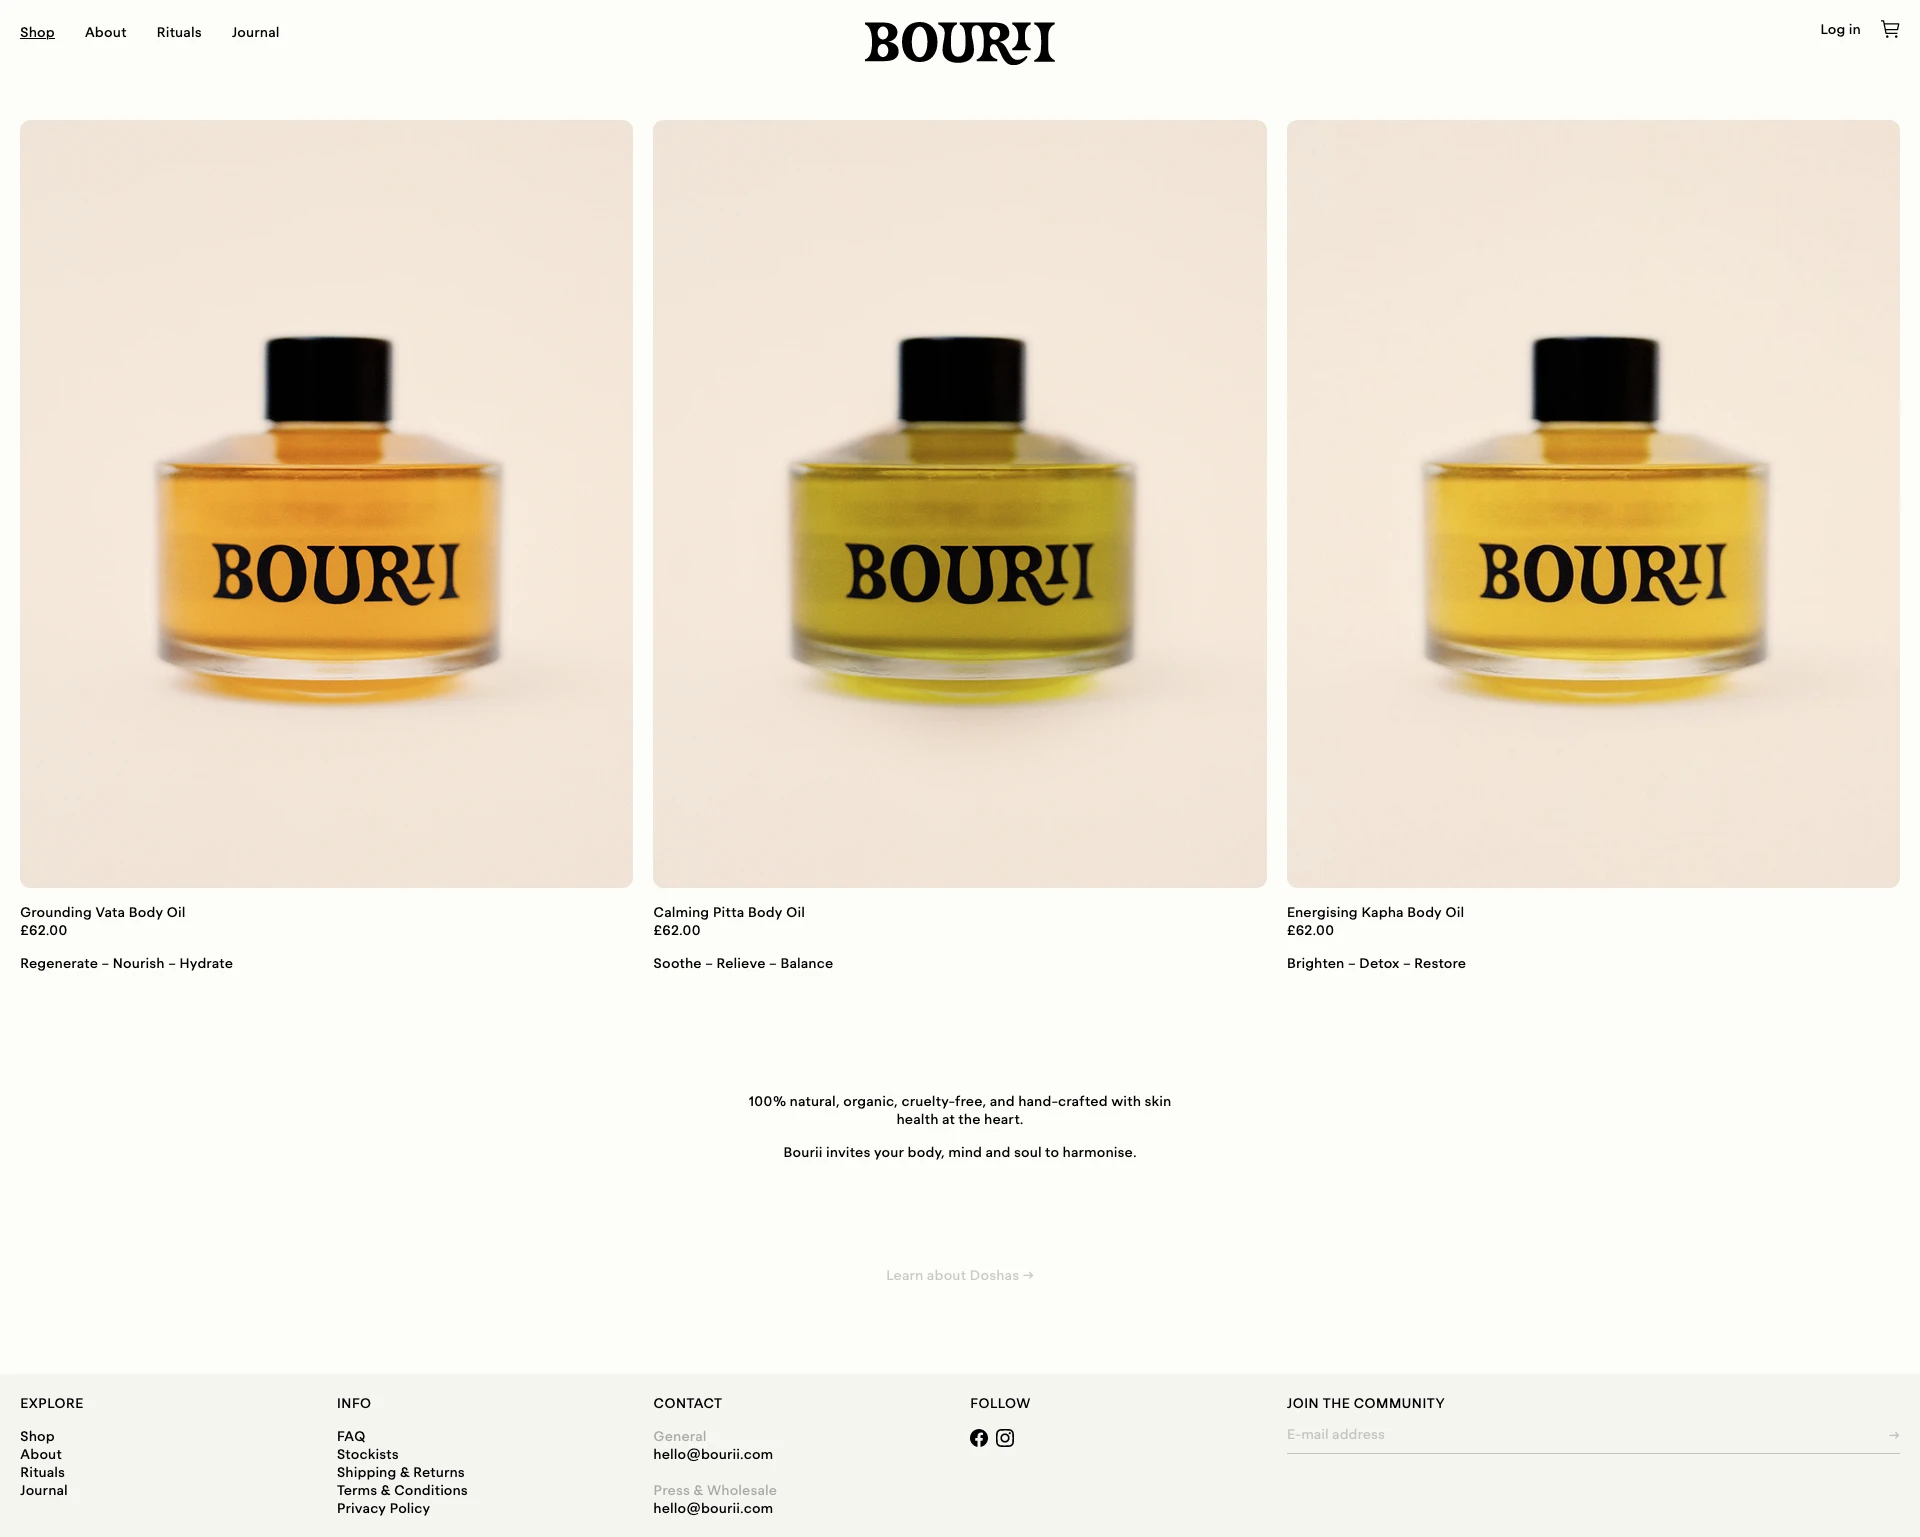 Bourii Landing Page Example: Botanical skincare for the body and soul. Free-spirited, Ancestrally rooted. Three unique multipurpose body oils. Crafted with purpose to honour Ayurvedic science and redefine ancient beauty rituals for the present moment. Plant-powered potions call on the healing power of botanicals to balance vital energy and nourish the senses as well as your skin. 100% Natural, Organic, Vegan, Cruelty Free, Recyclable, Gender neutral.